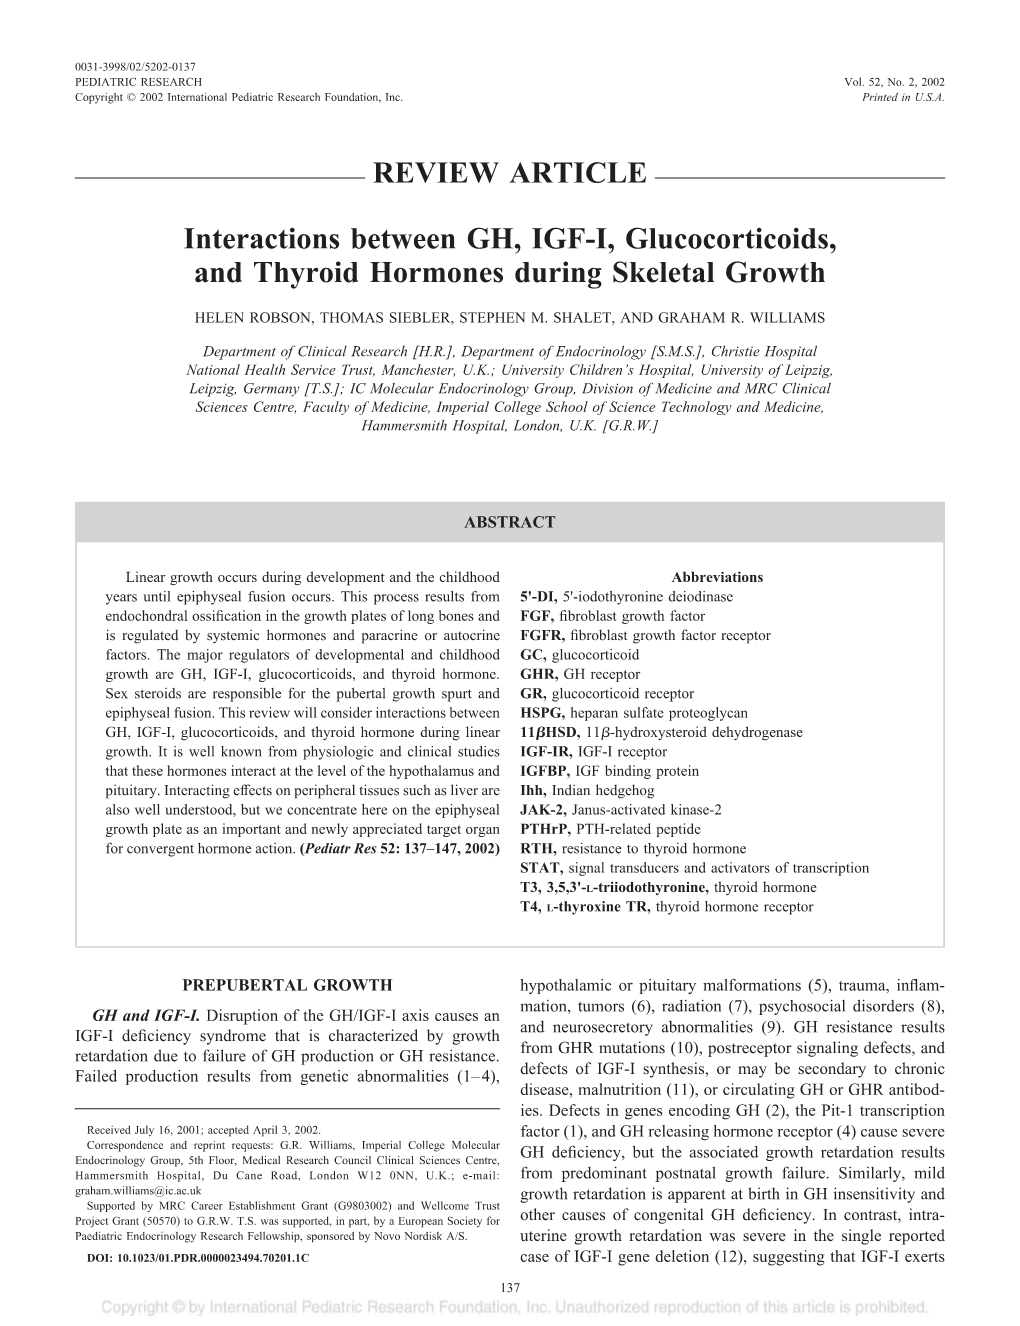 REVIEW ARTICLE Interactions Between GH, IGF-I, Glucocorticoids